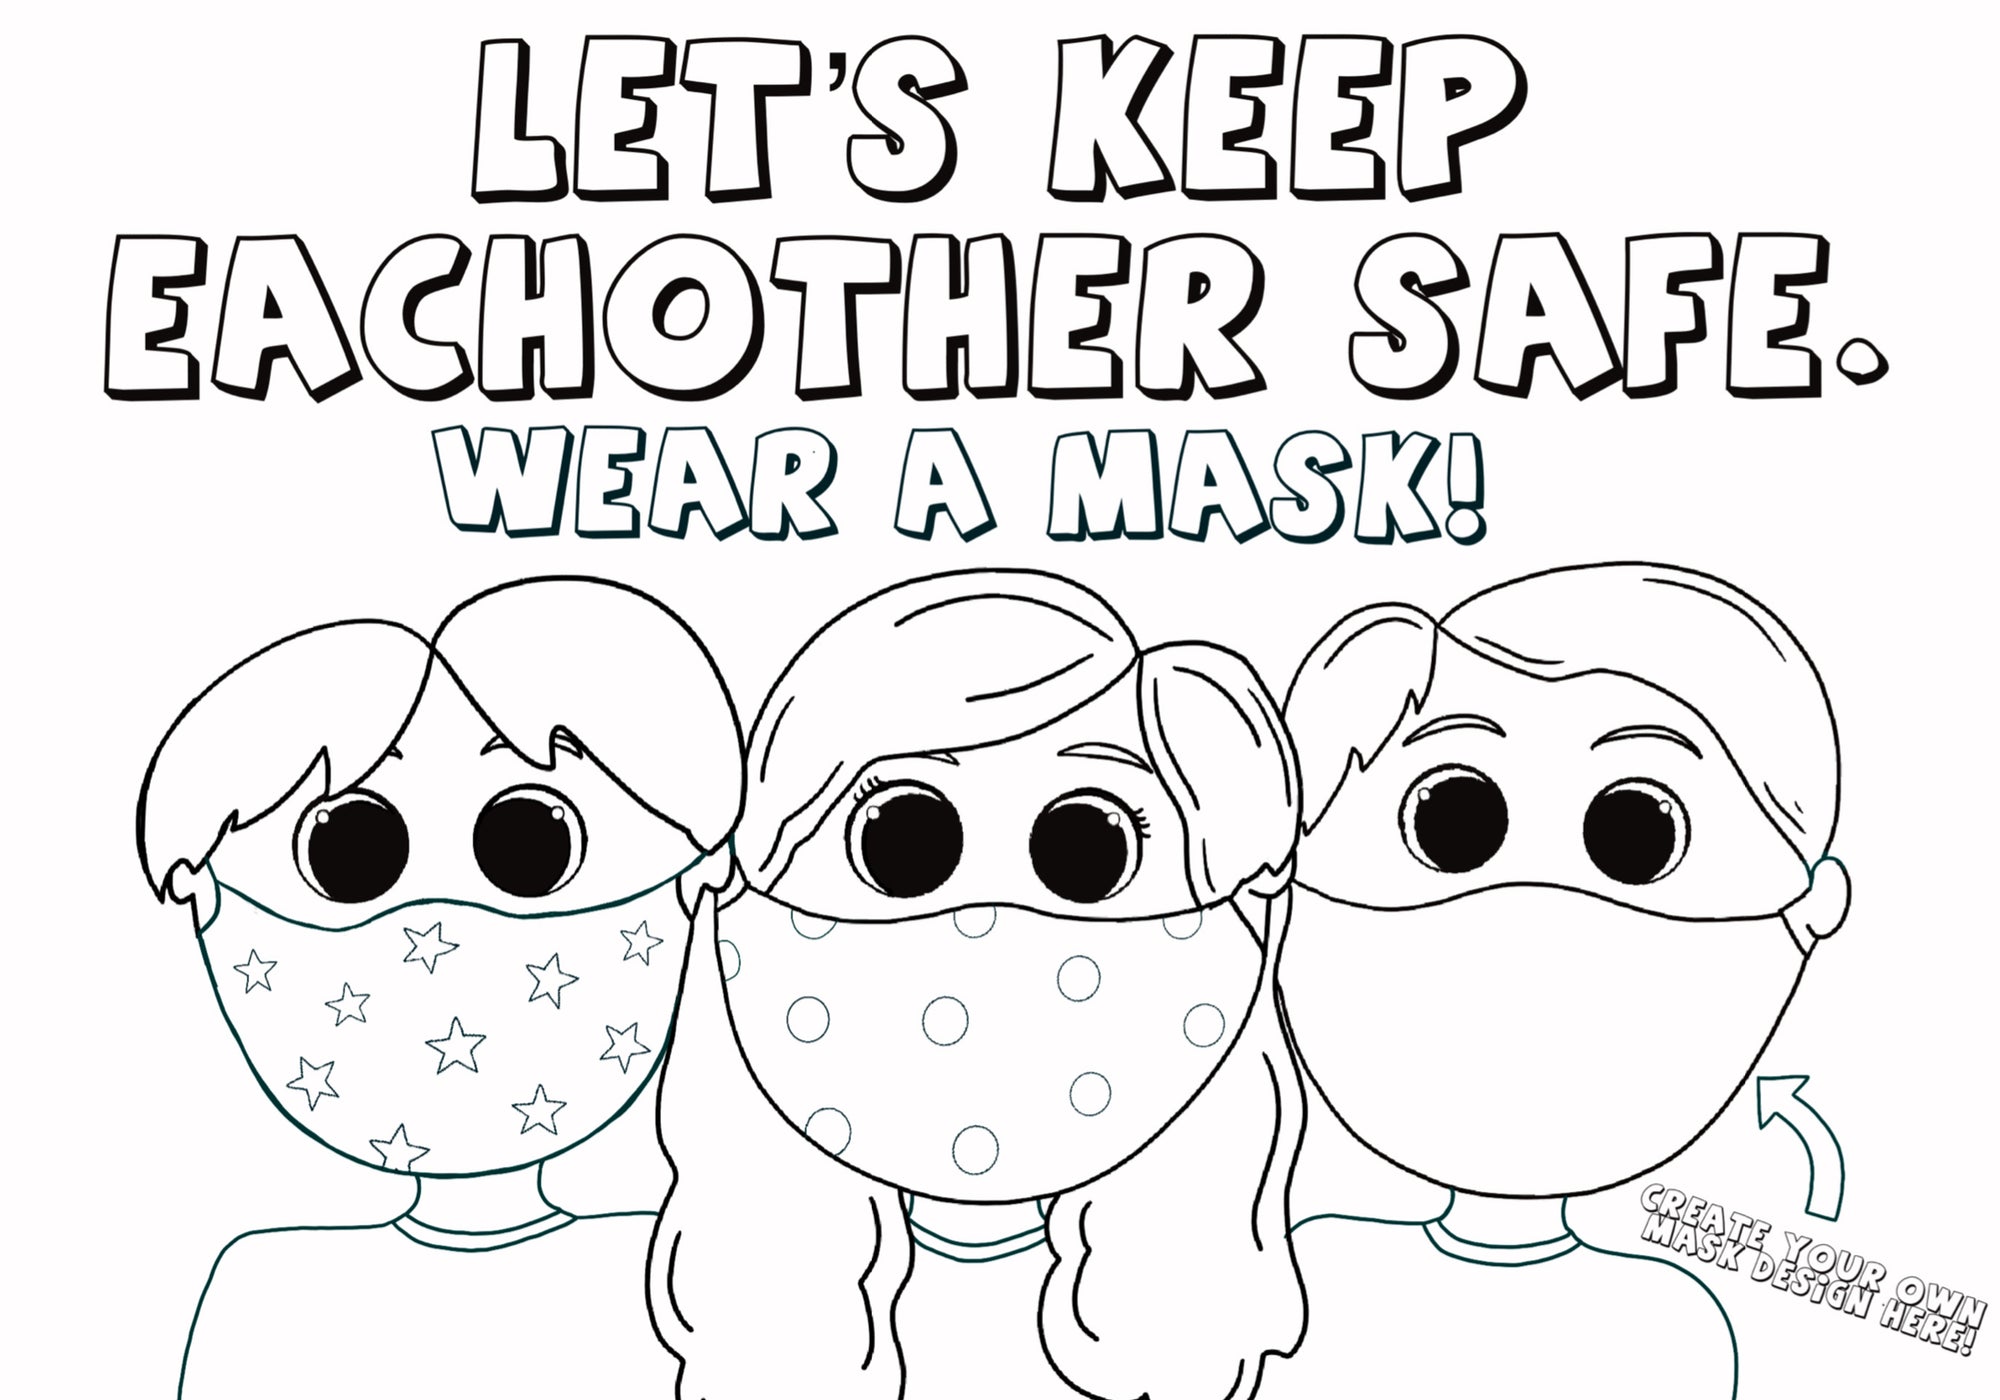 Kids Wearing Face Masks Coloring Page!